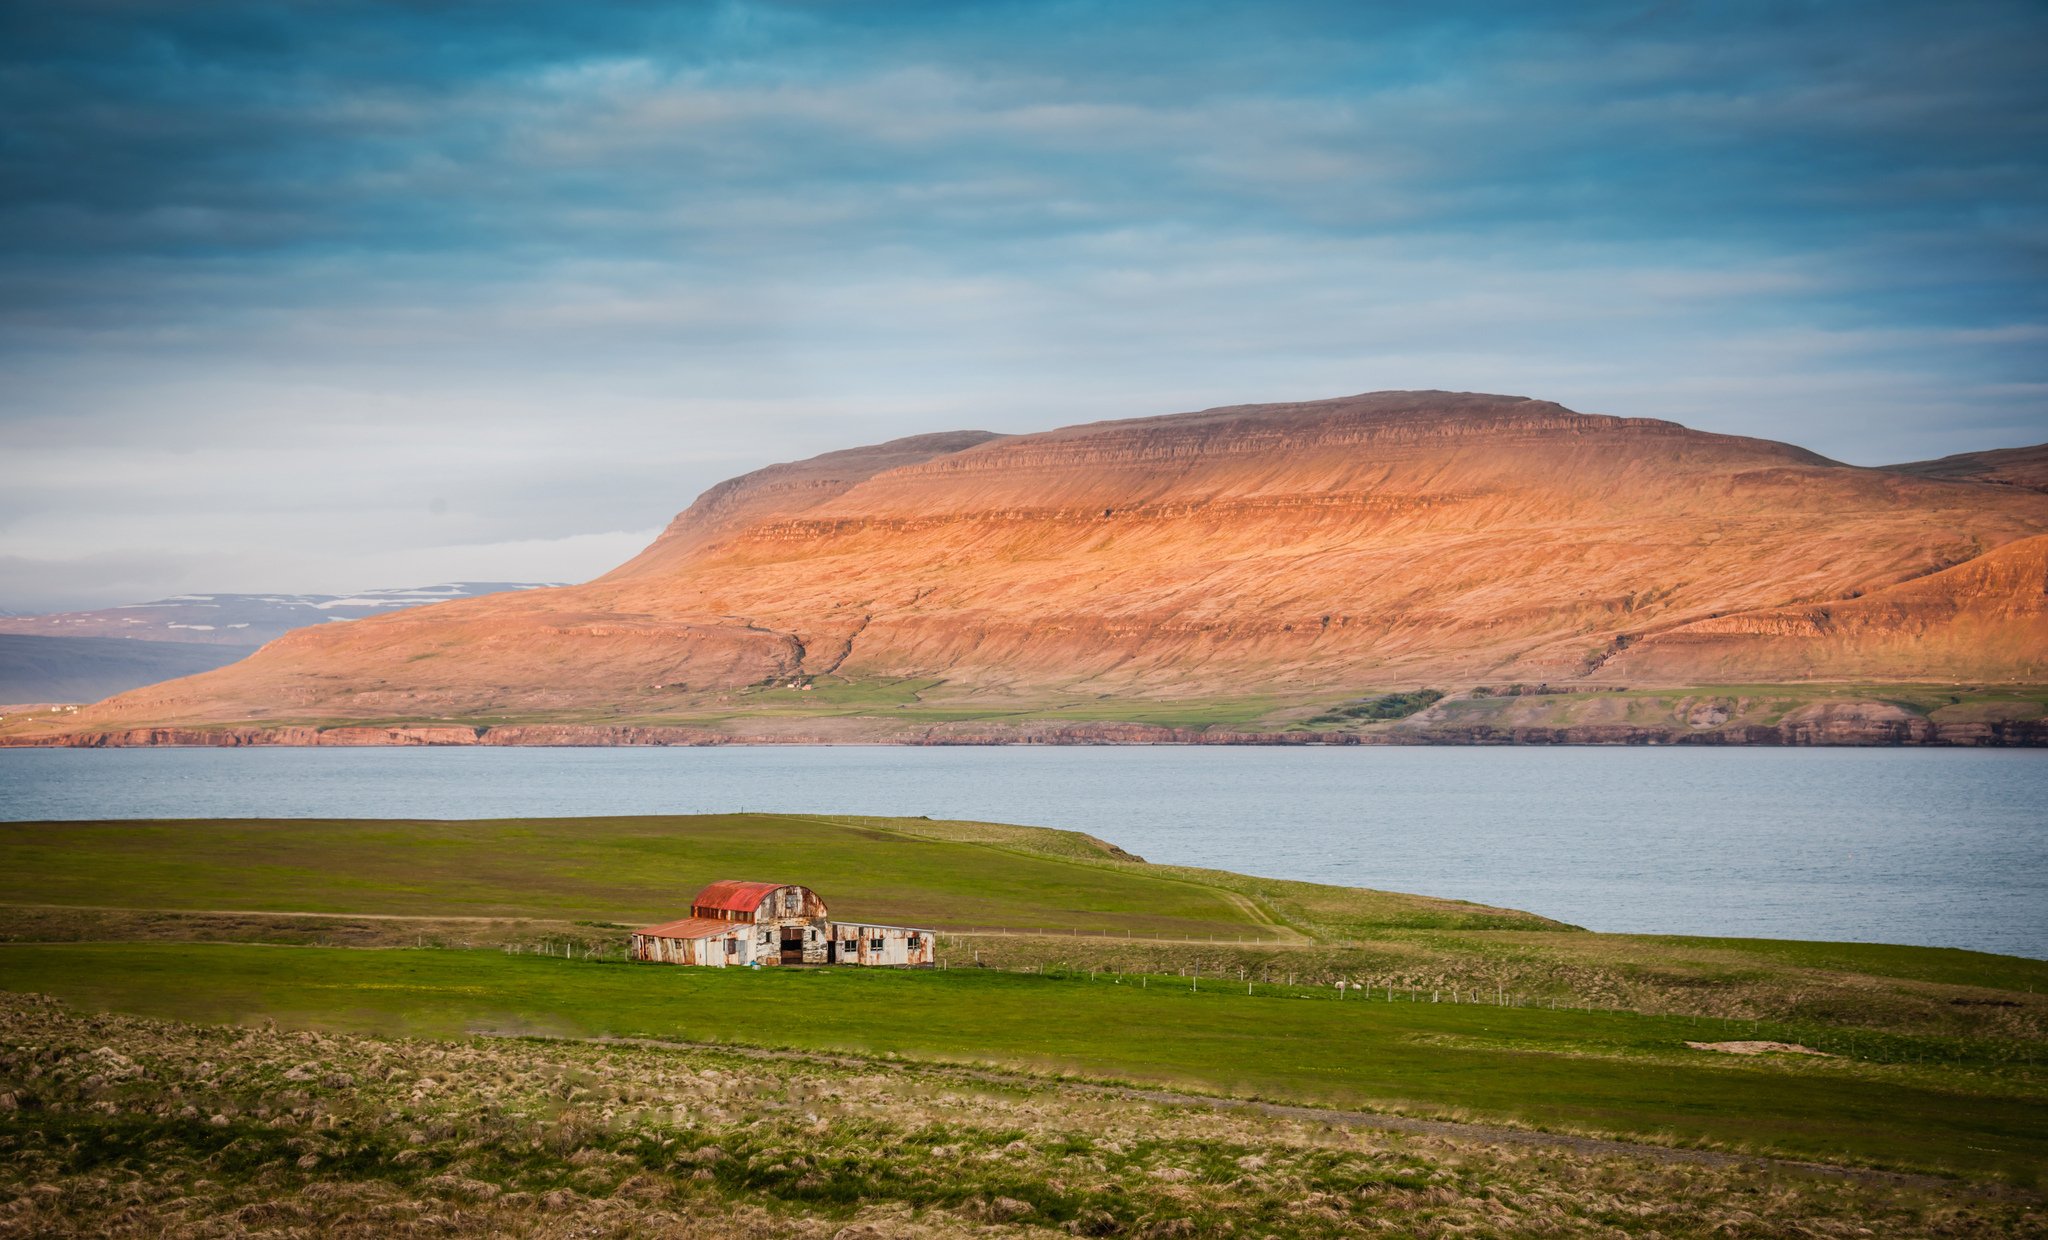 iceland, Mountains, Bay, Sea, Water, House, Lawn, Grass, Sky, Clouds, Landscape, Nature, Farm, Barn Wallpaper